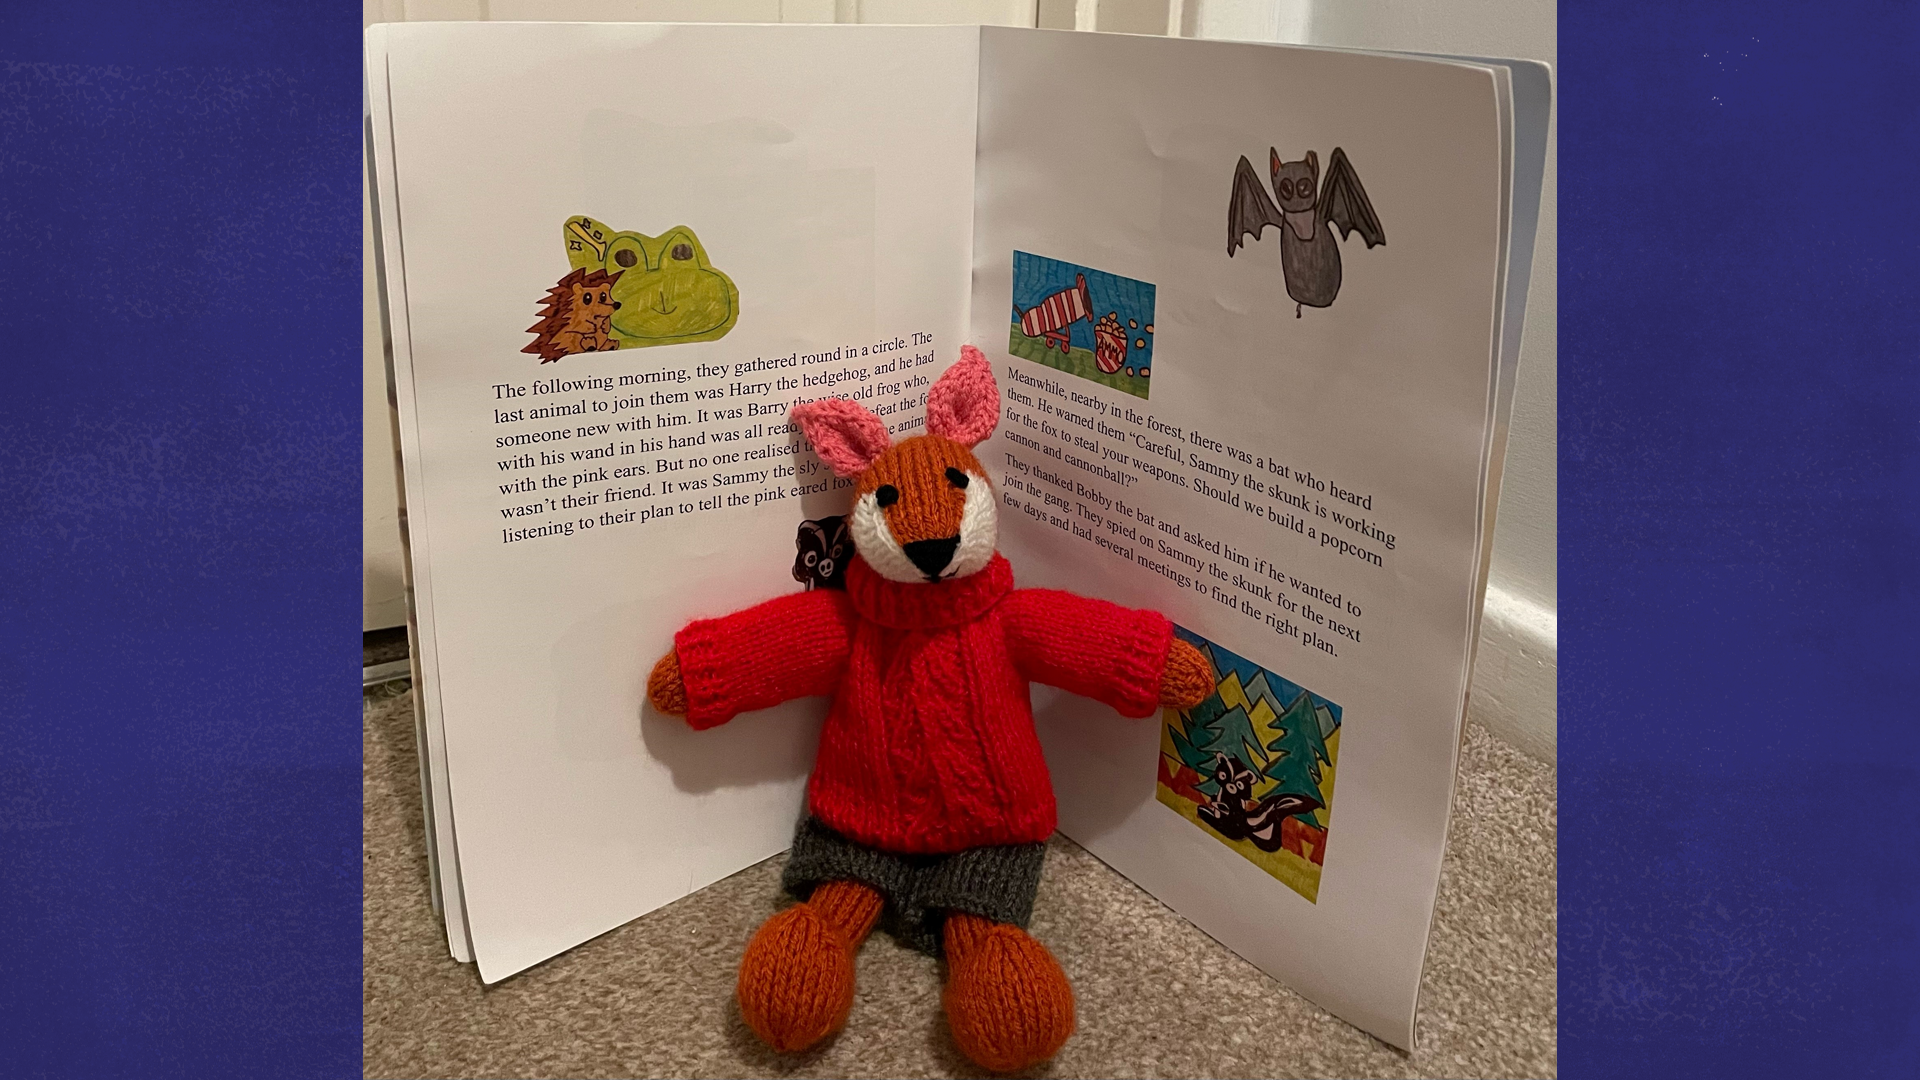 Class 6CJ's book open with a toy fox in front of it.